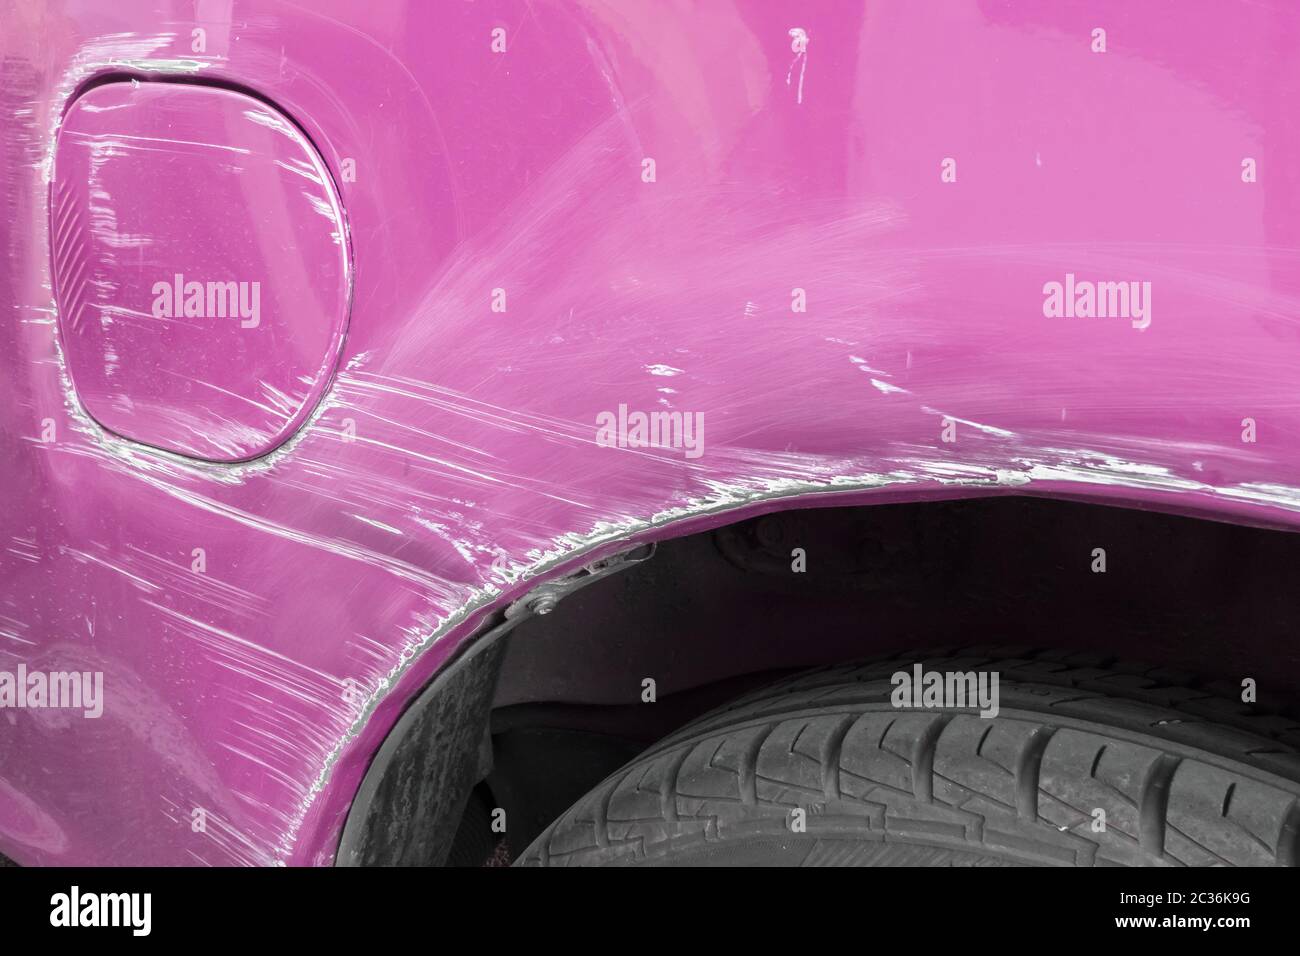 Trying out the viral pink stuff to get rid of the scratches on my car!, the pink stuff on cars